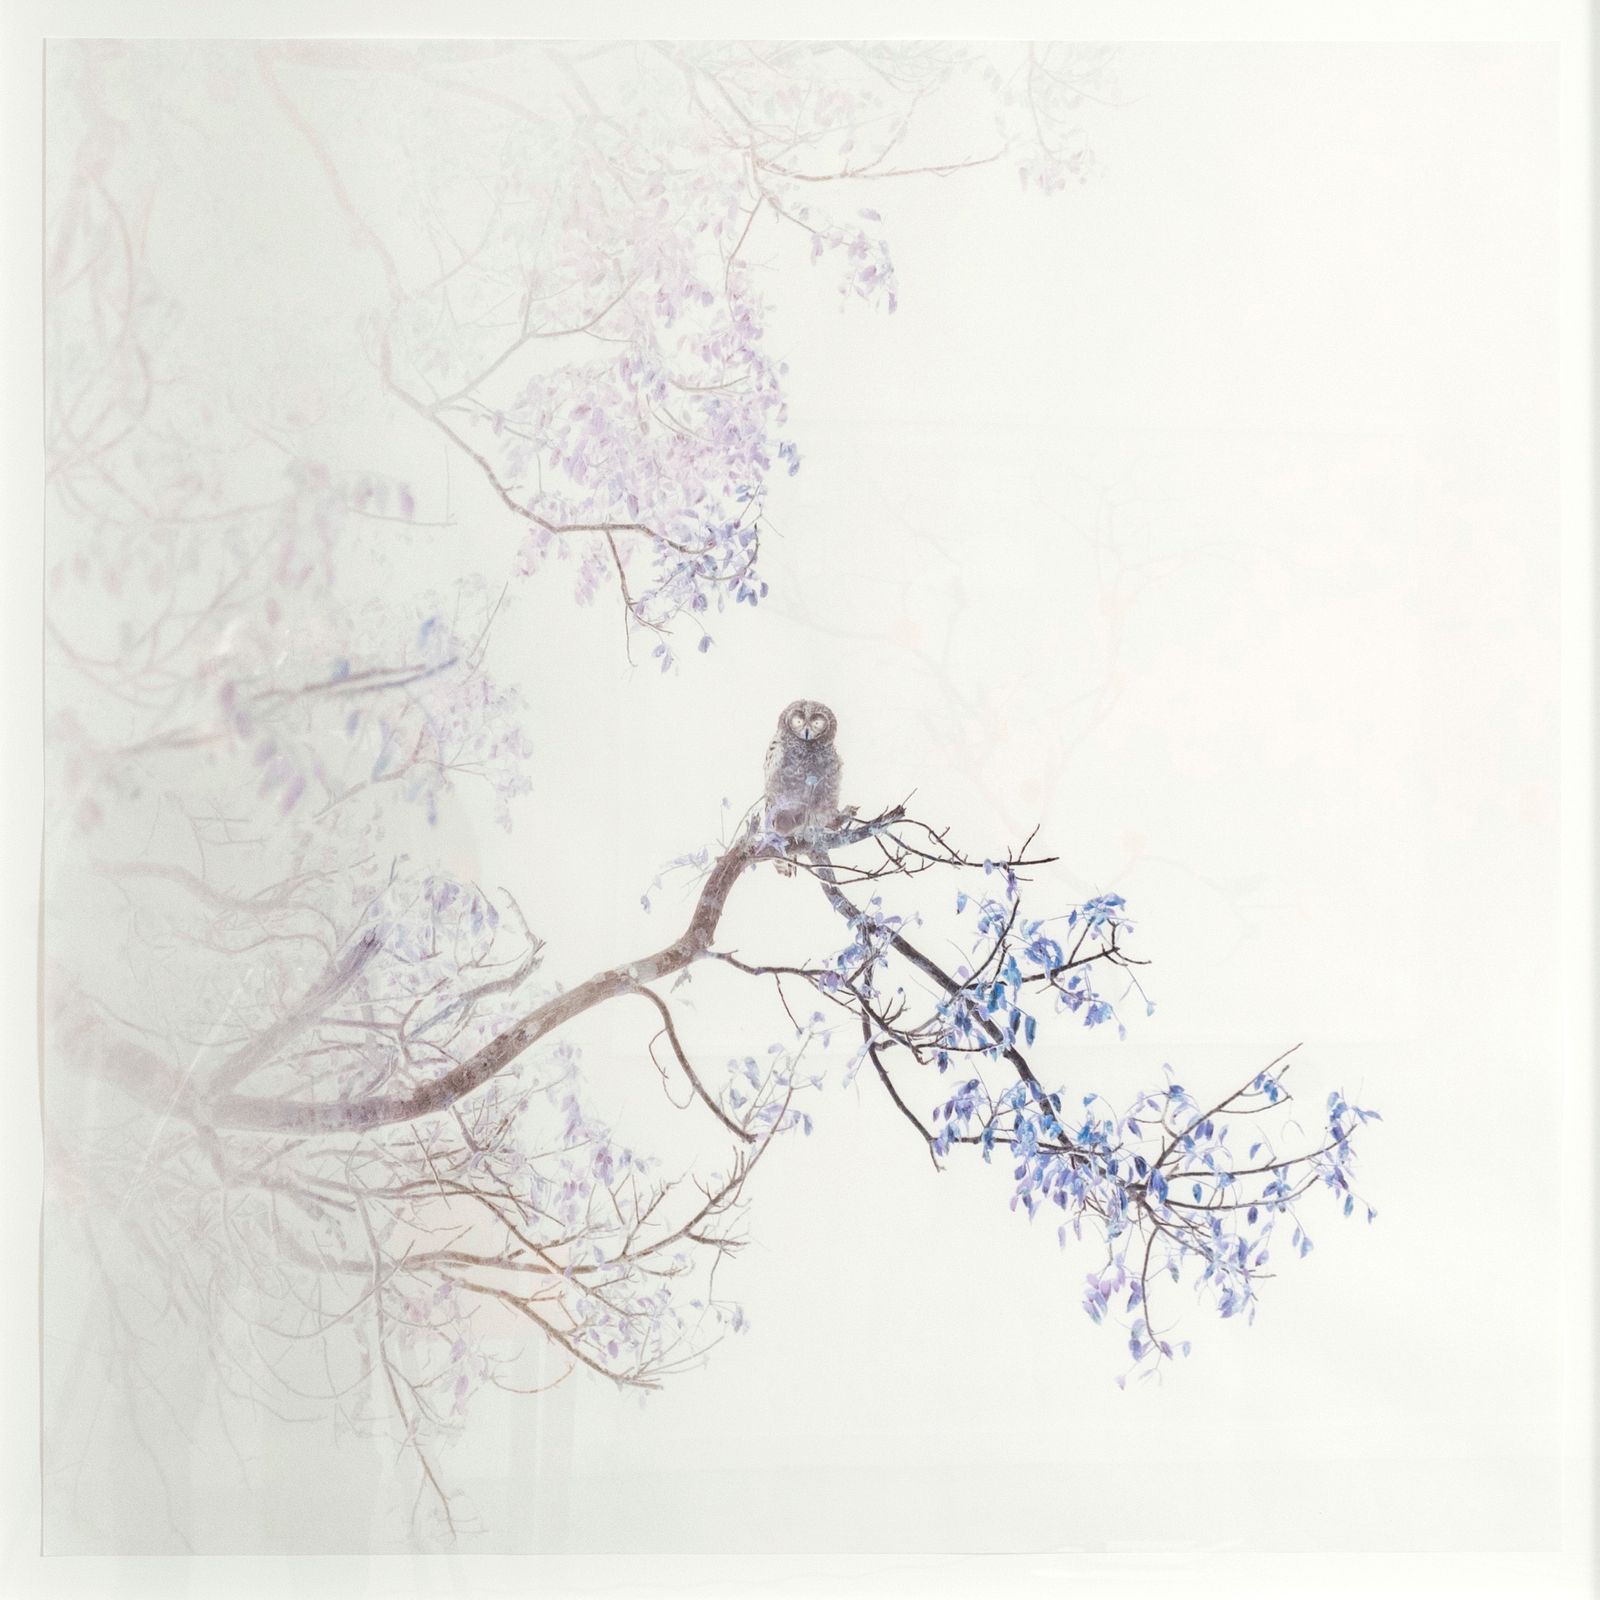 © Itamar Freed - Barred Owl, 2019, Photography, inkjet pigment print on archival Kozo Japanese paper, 110x110 cm